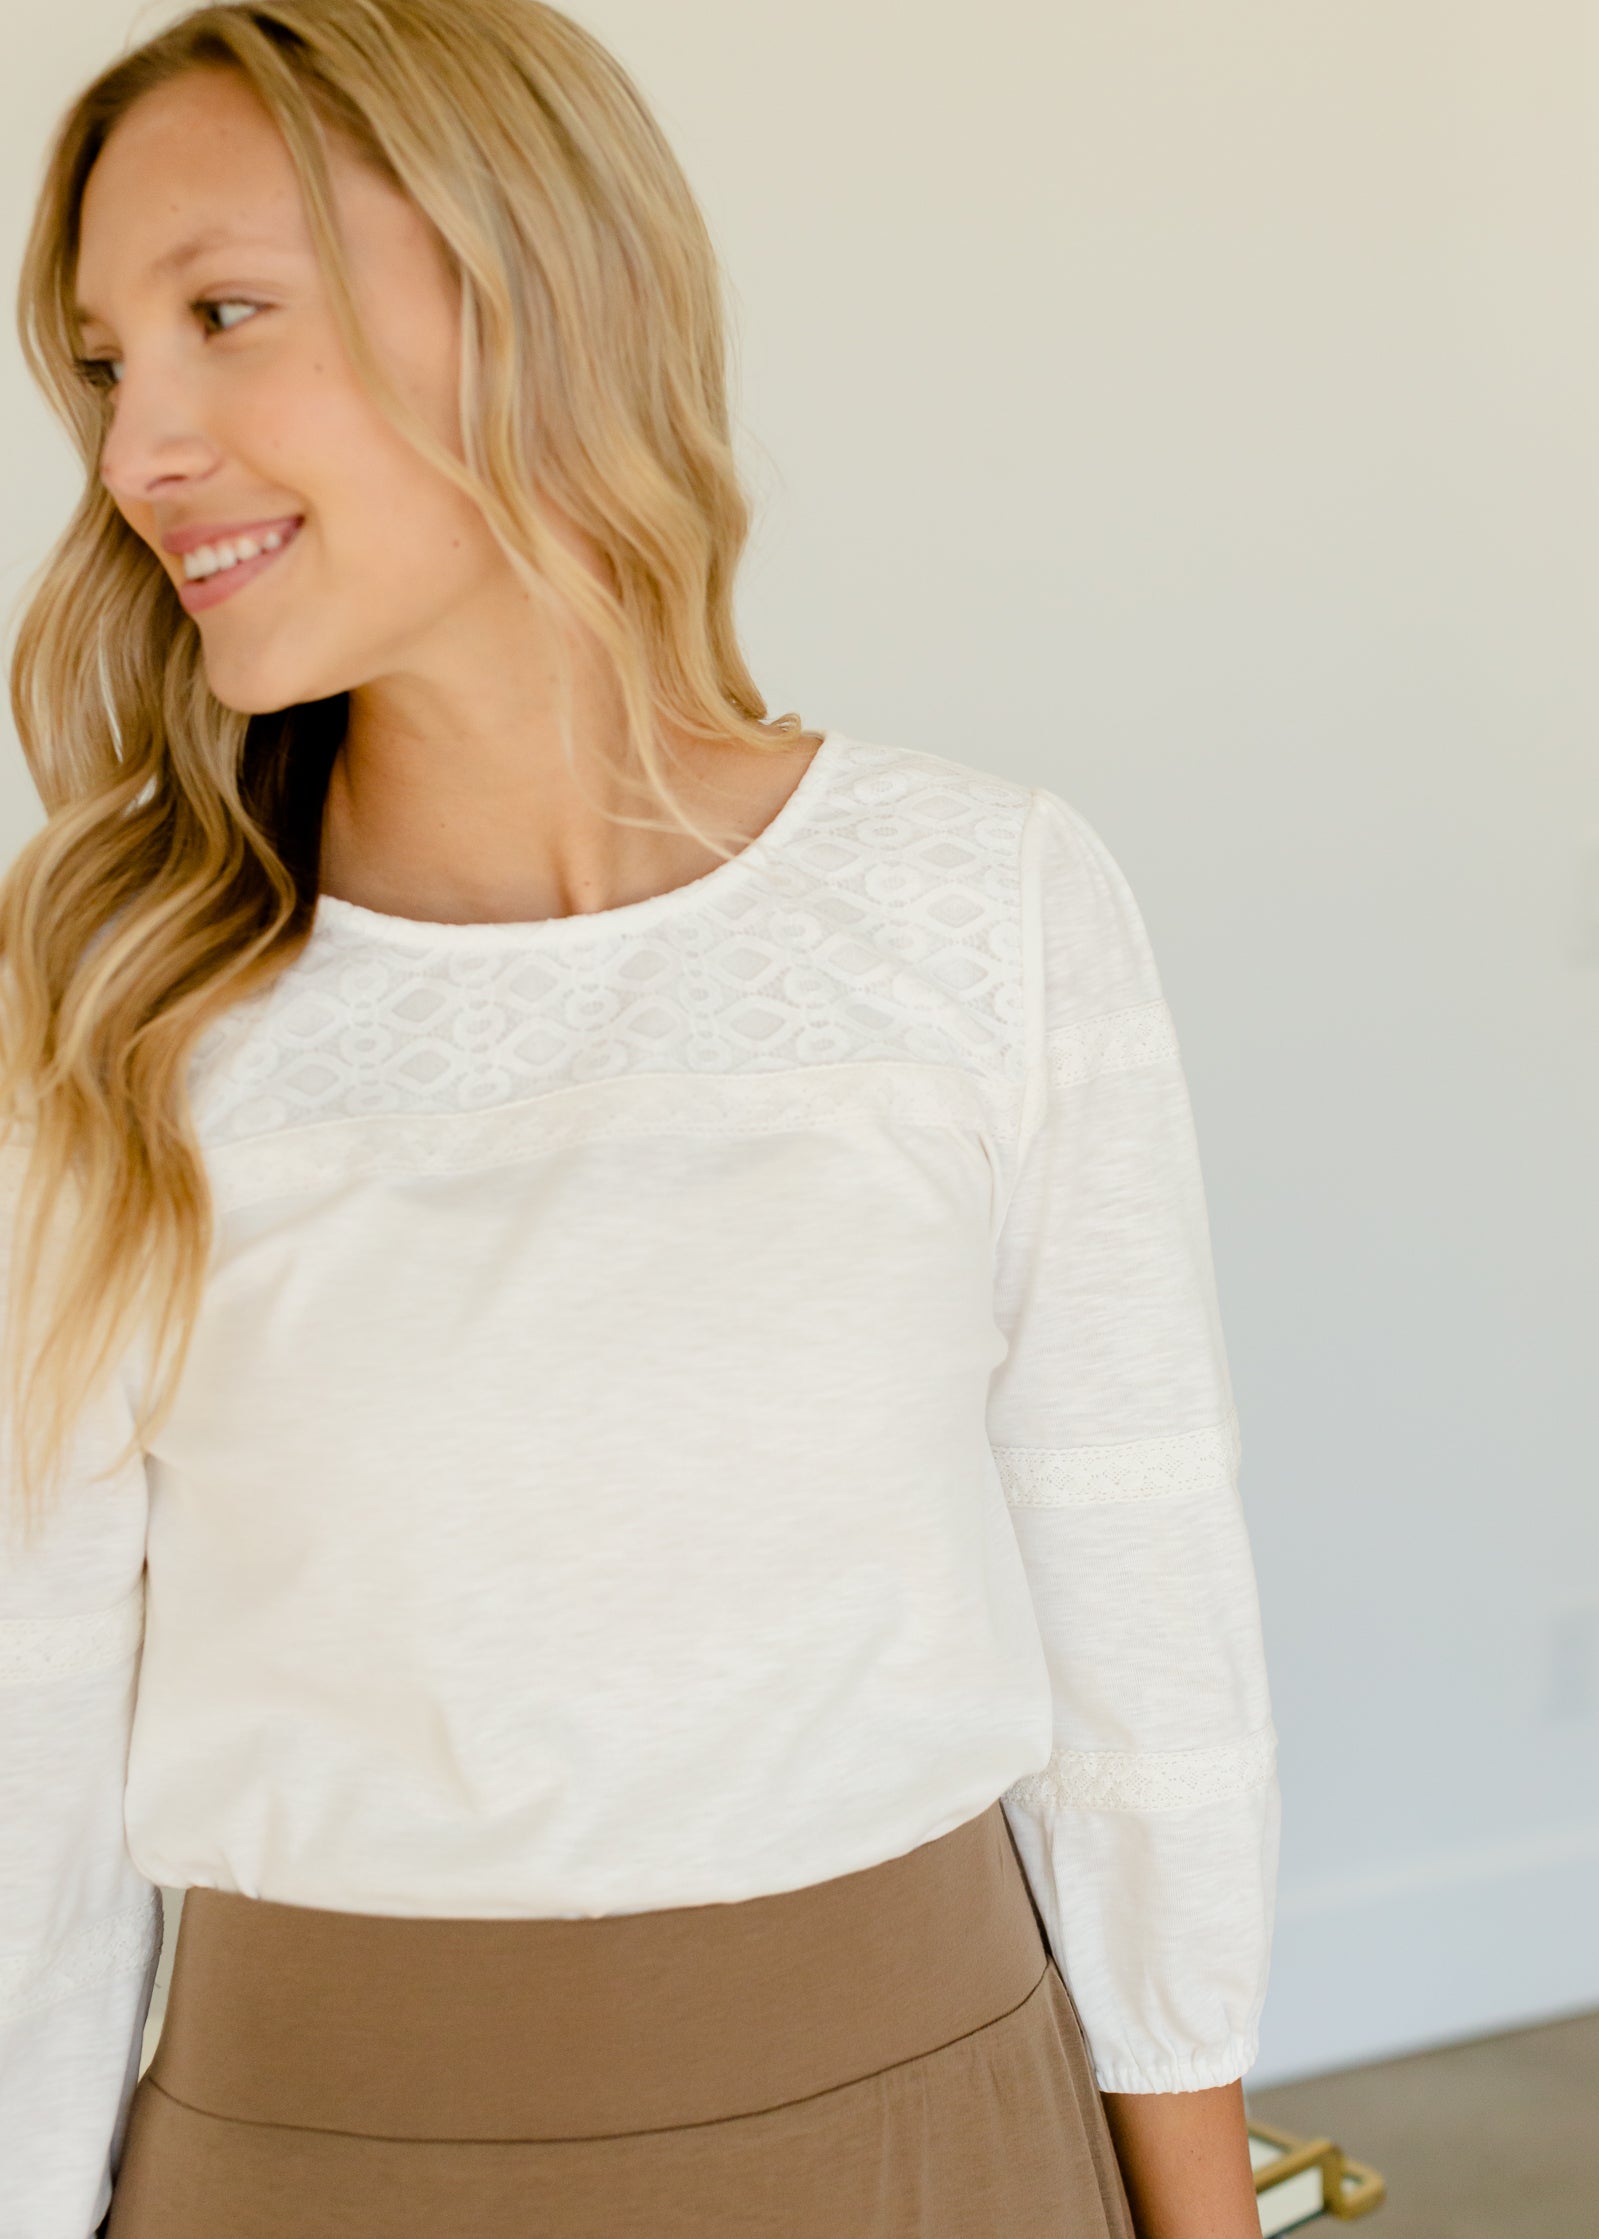 Ivory Knit Lace Detail Top - FINAL SALE Tops